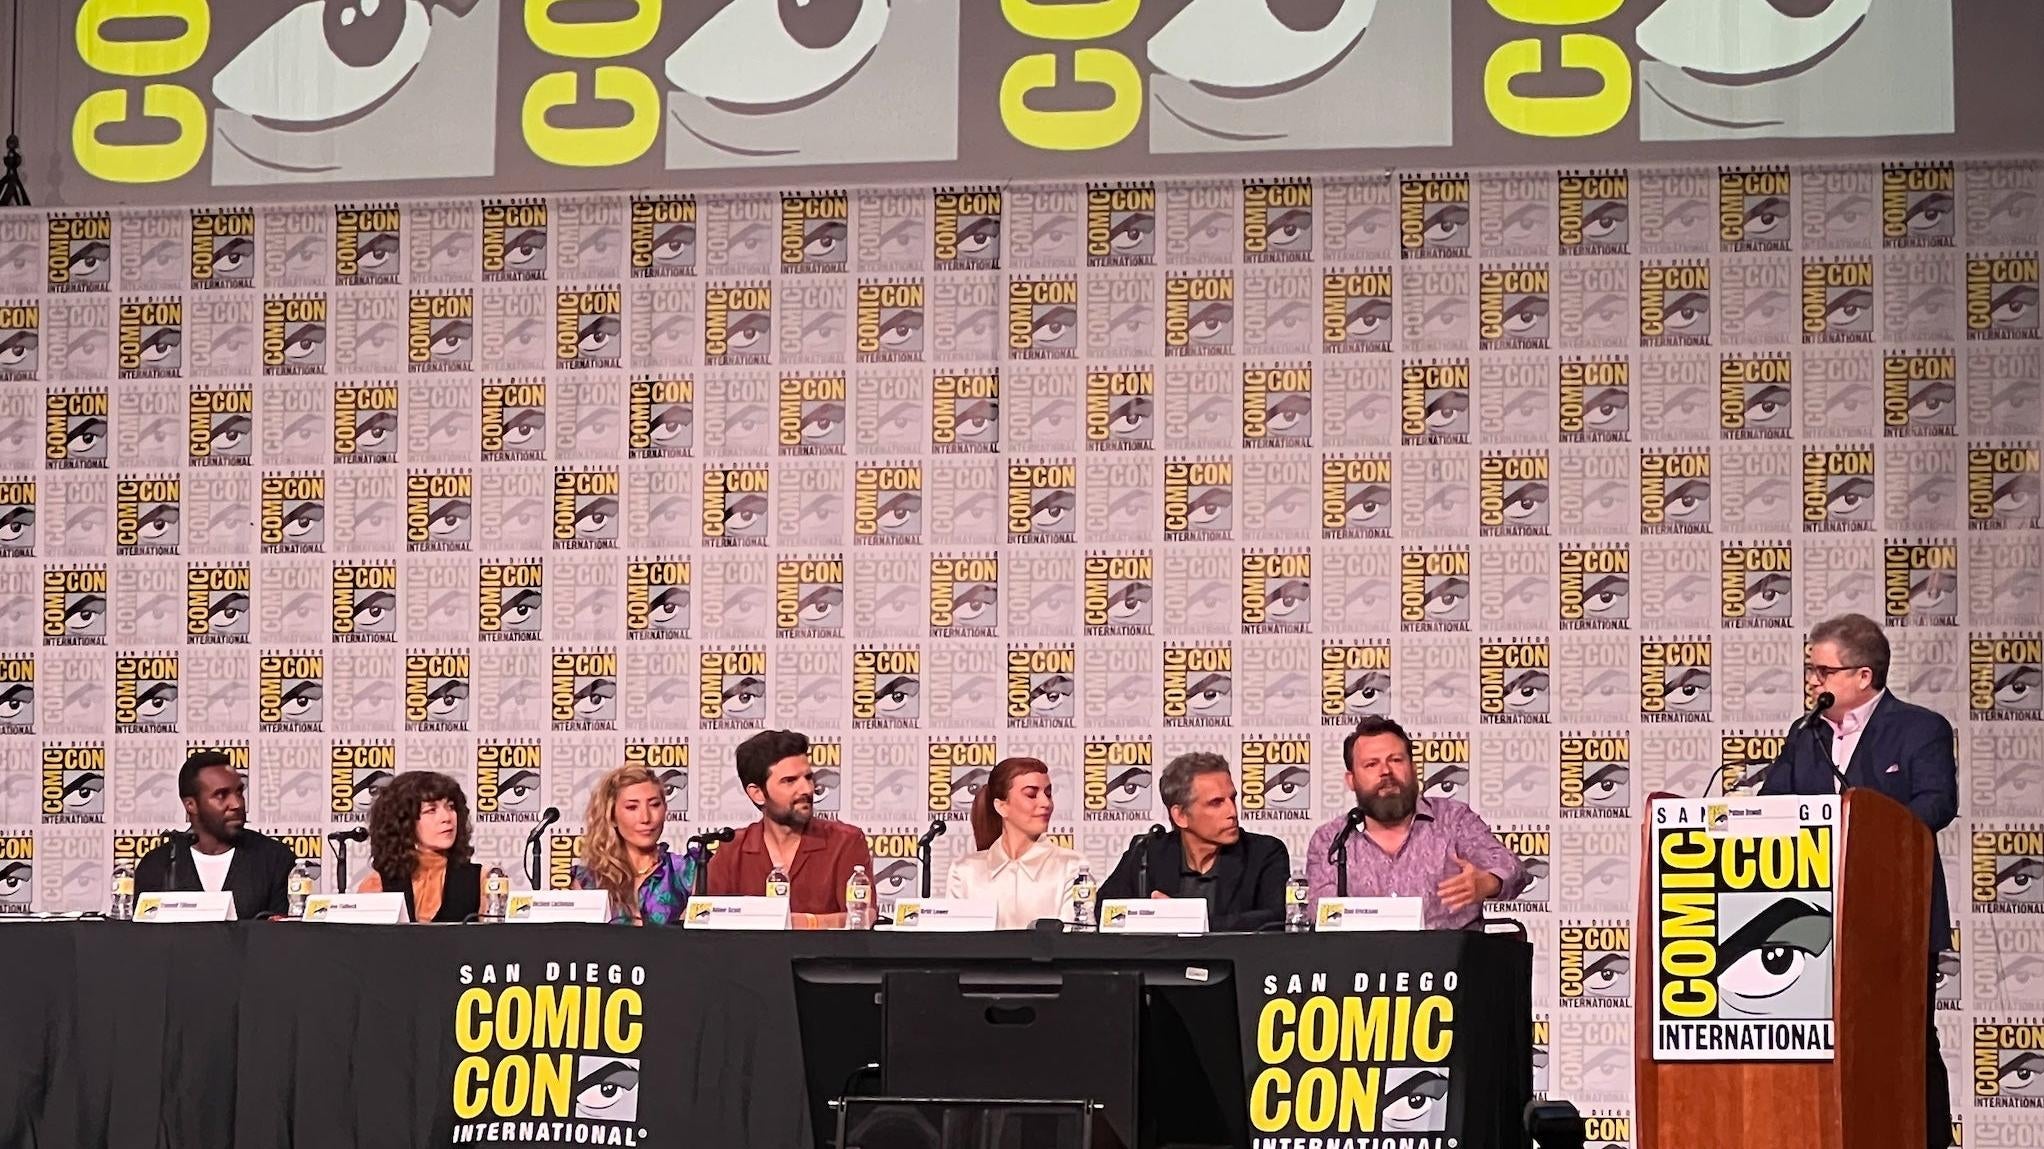 The Comic-Con panel, moderated by Patton Oswalt.  (Photo: Gizmodo/Germain Lussier)